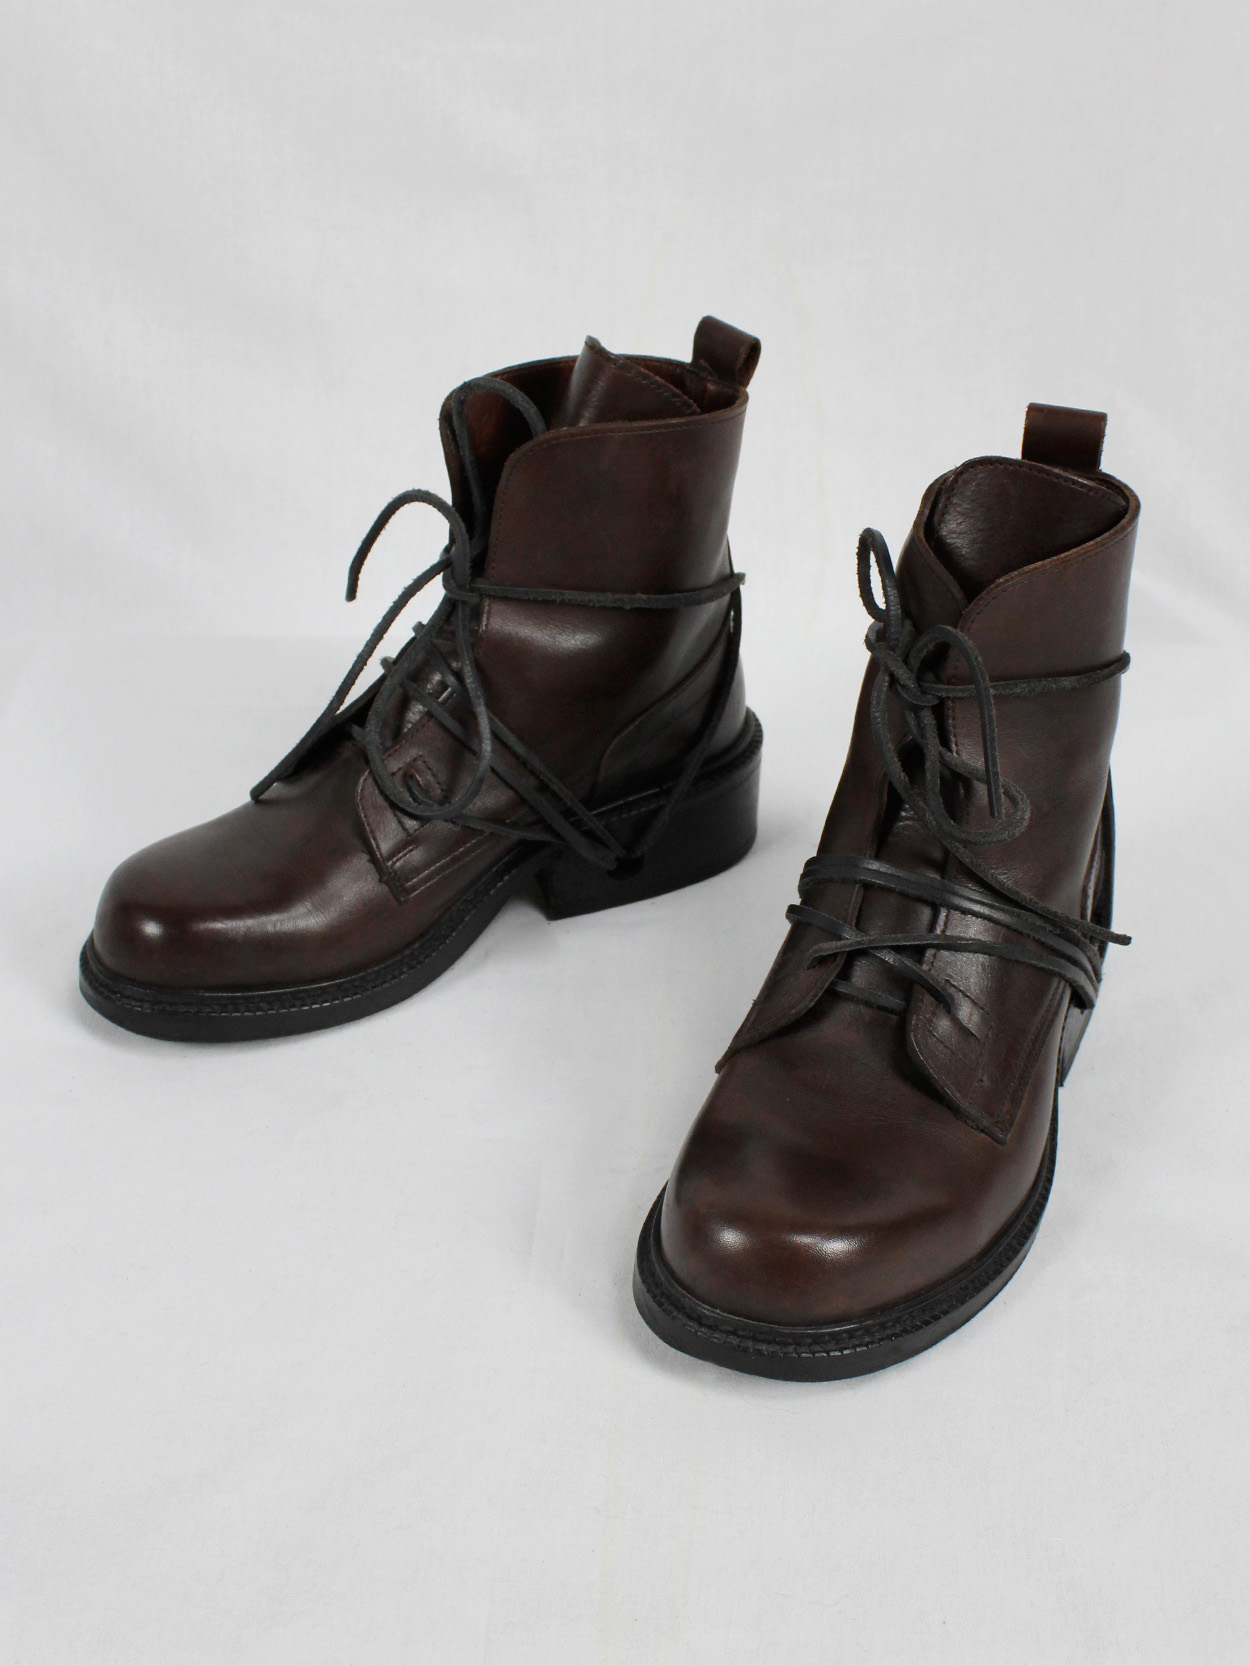 Dirk Bikkembergs brown tall boots with laces through the soles vaniitas (11)